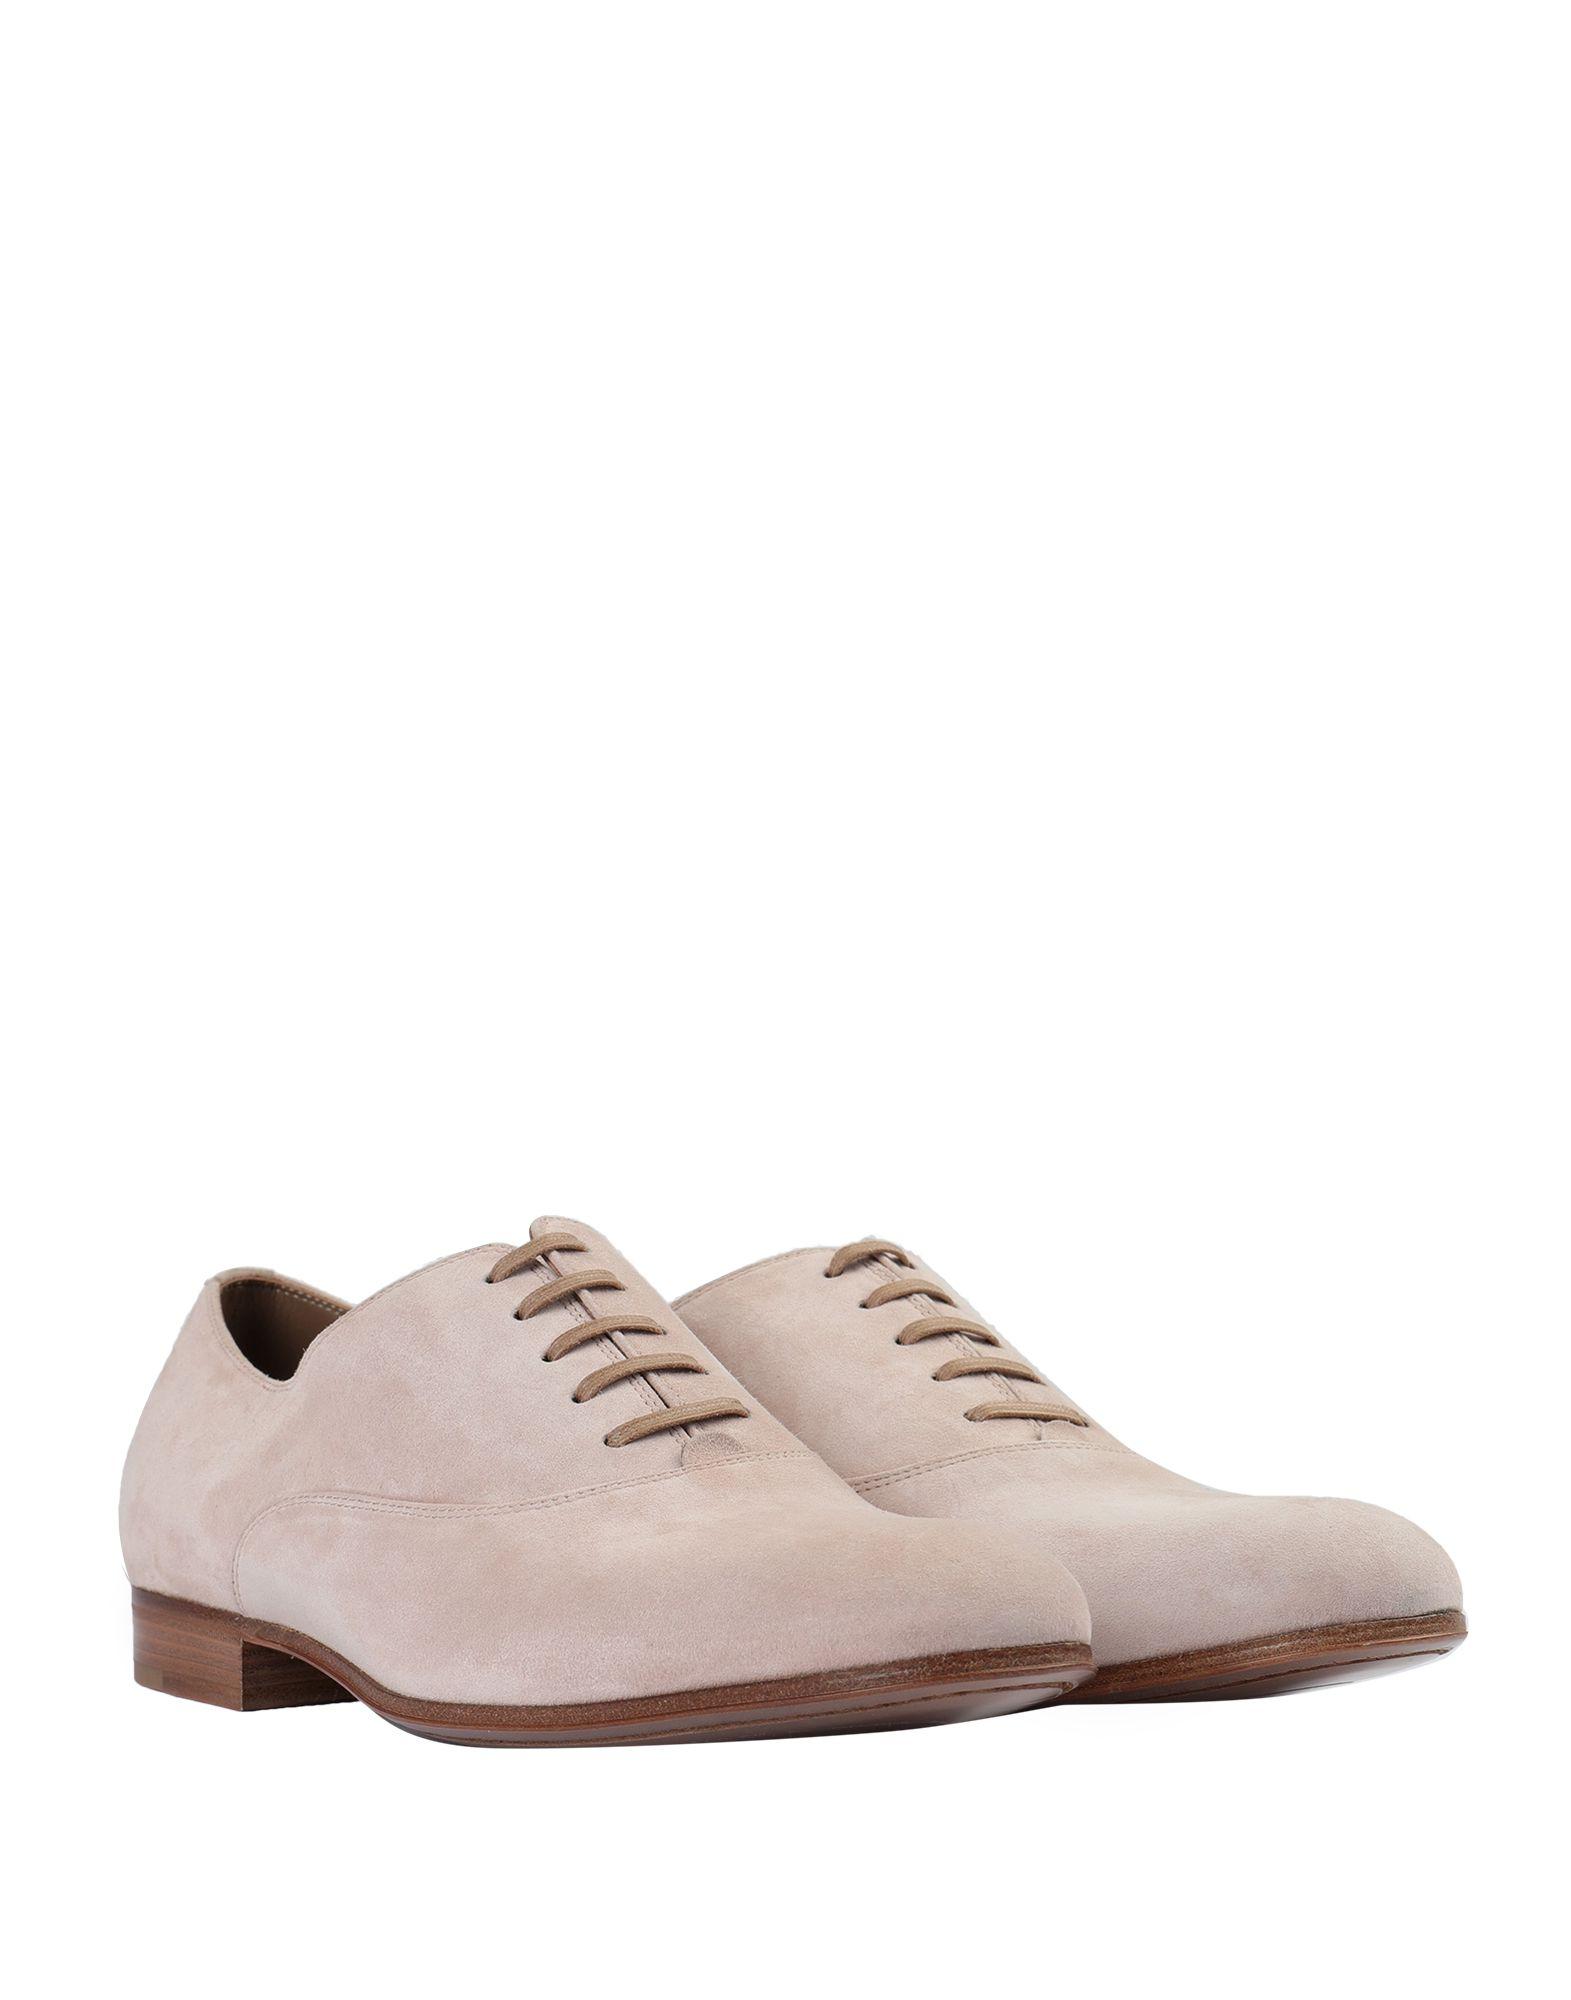 Gianvito Rossi Suede Lace-up Shoe in Light Pink (Pink) for Men - Lyst